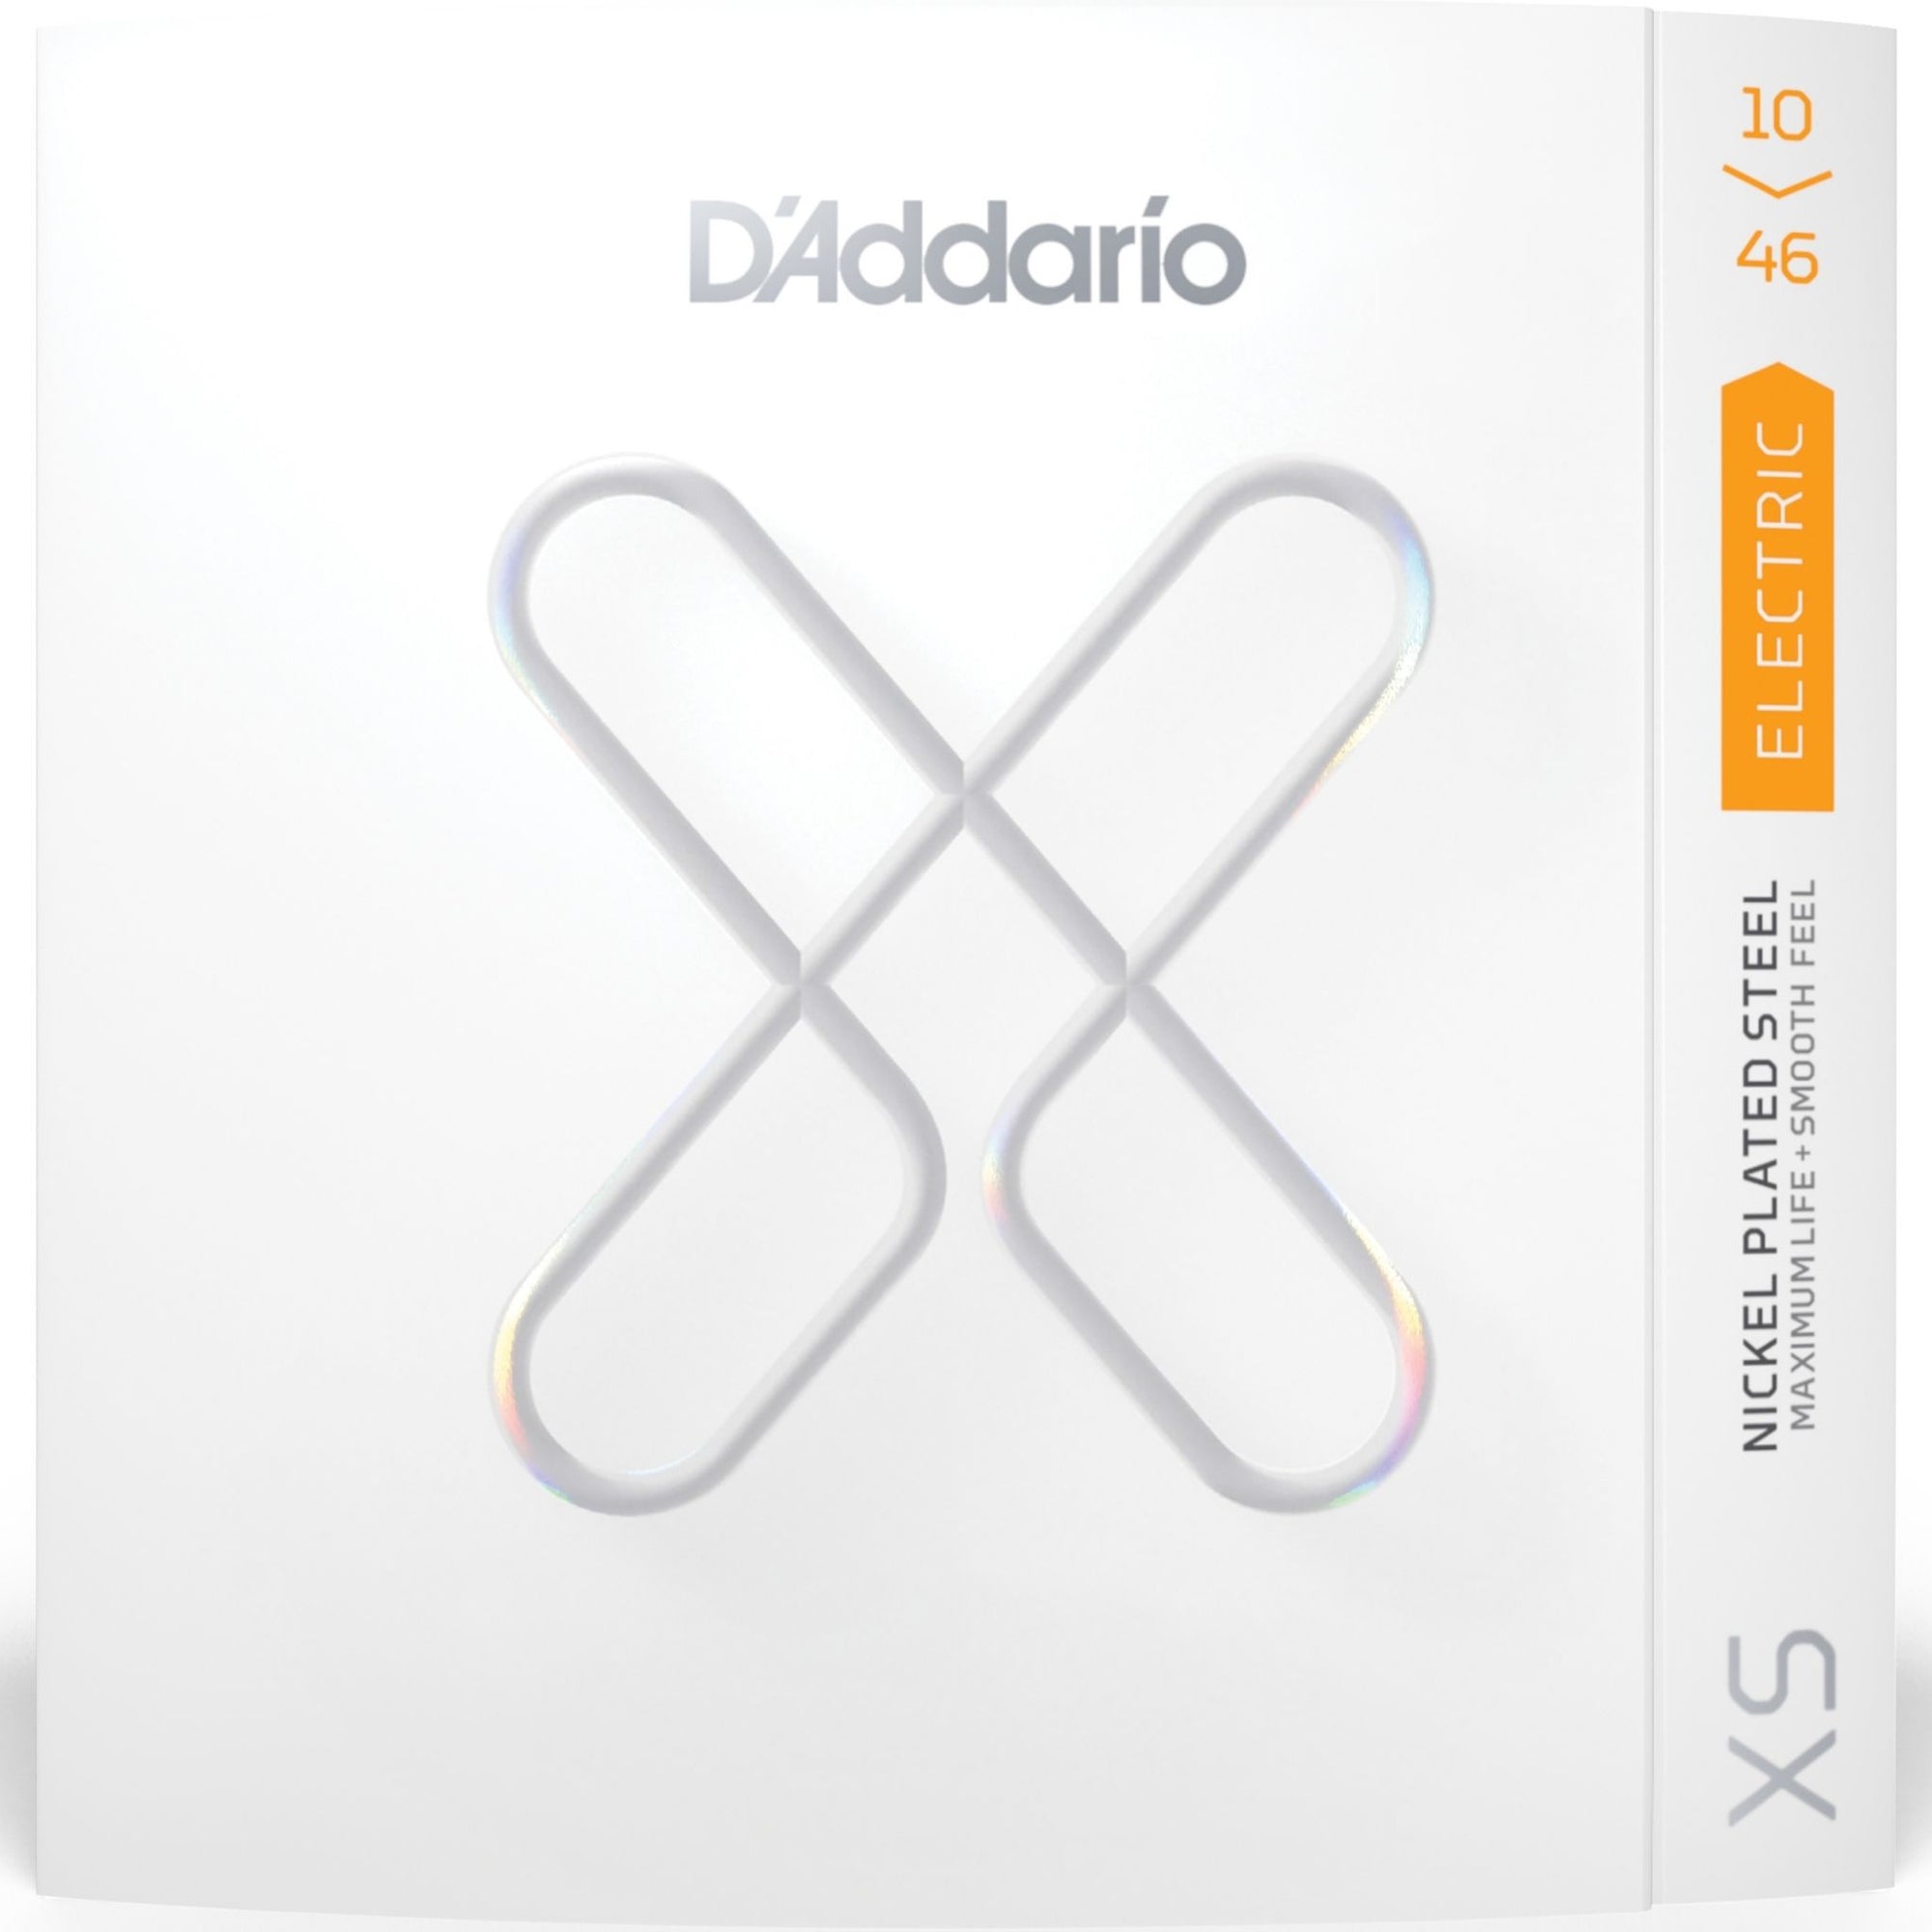 D'Addario XSE1046 Coated Nickel-plated Steel Light Electric Guitar Strings 10-46 Package Front